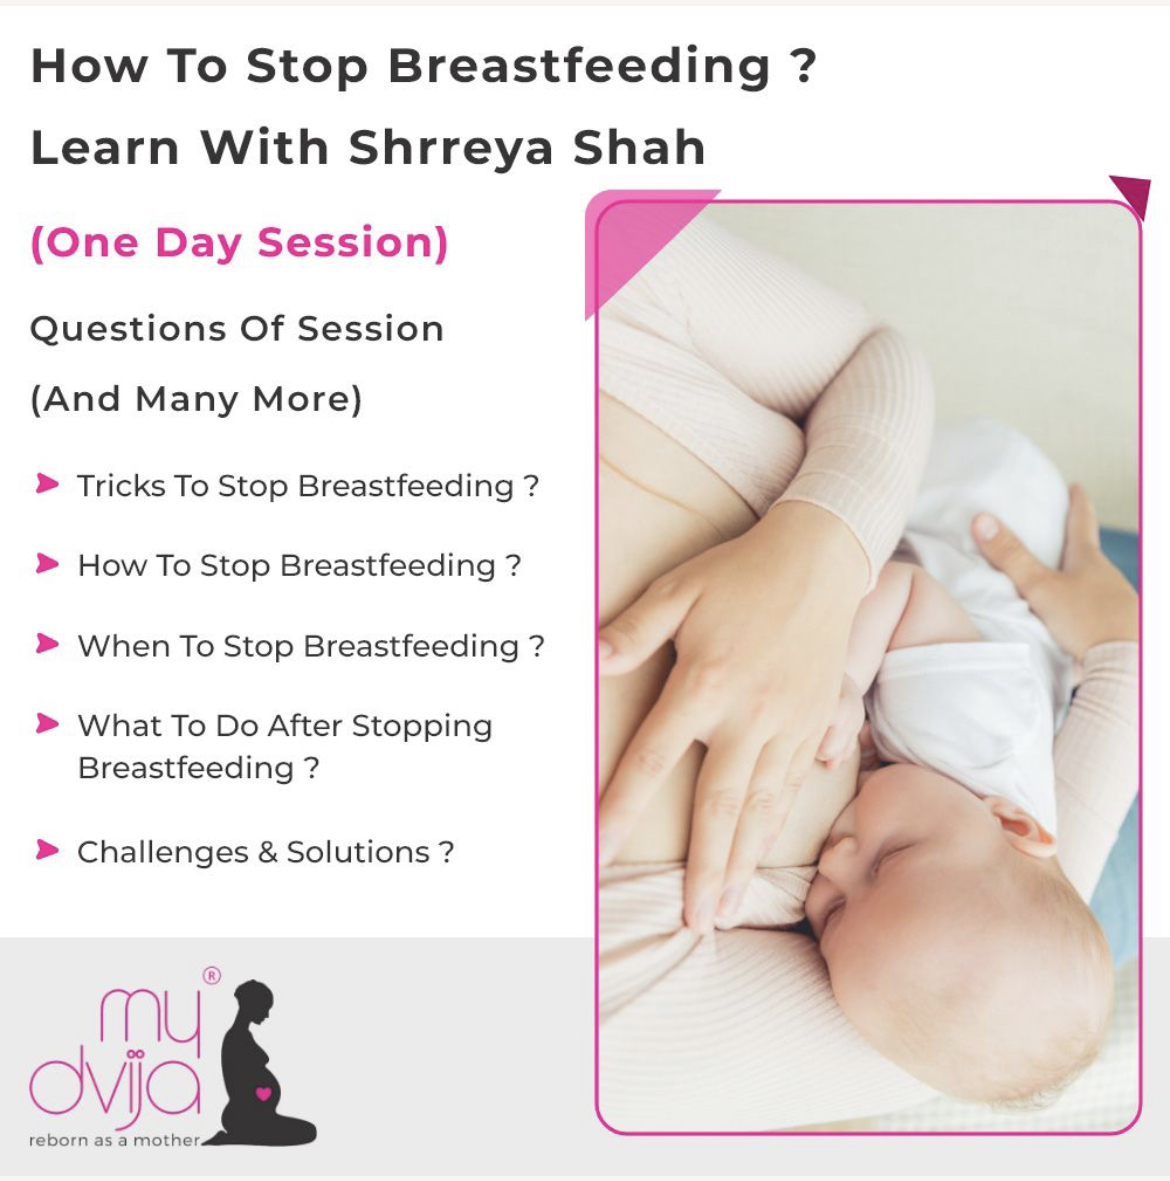 How to Stop Breastfeeding From a Doula